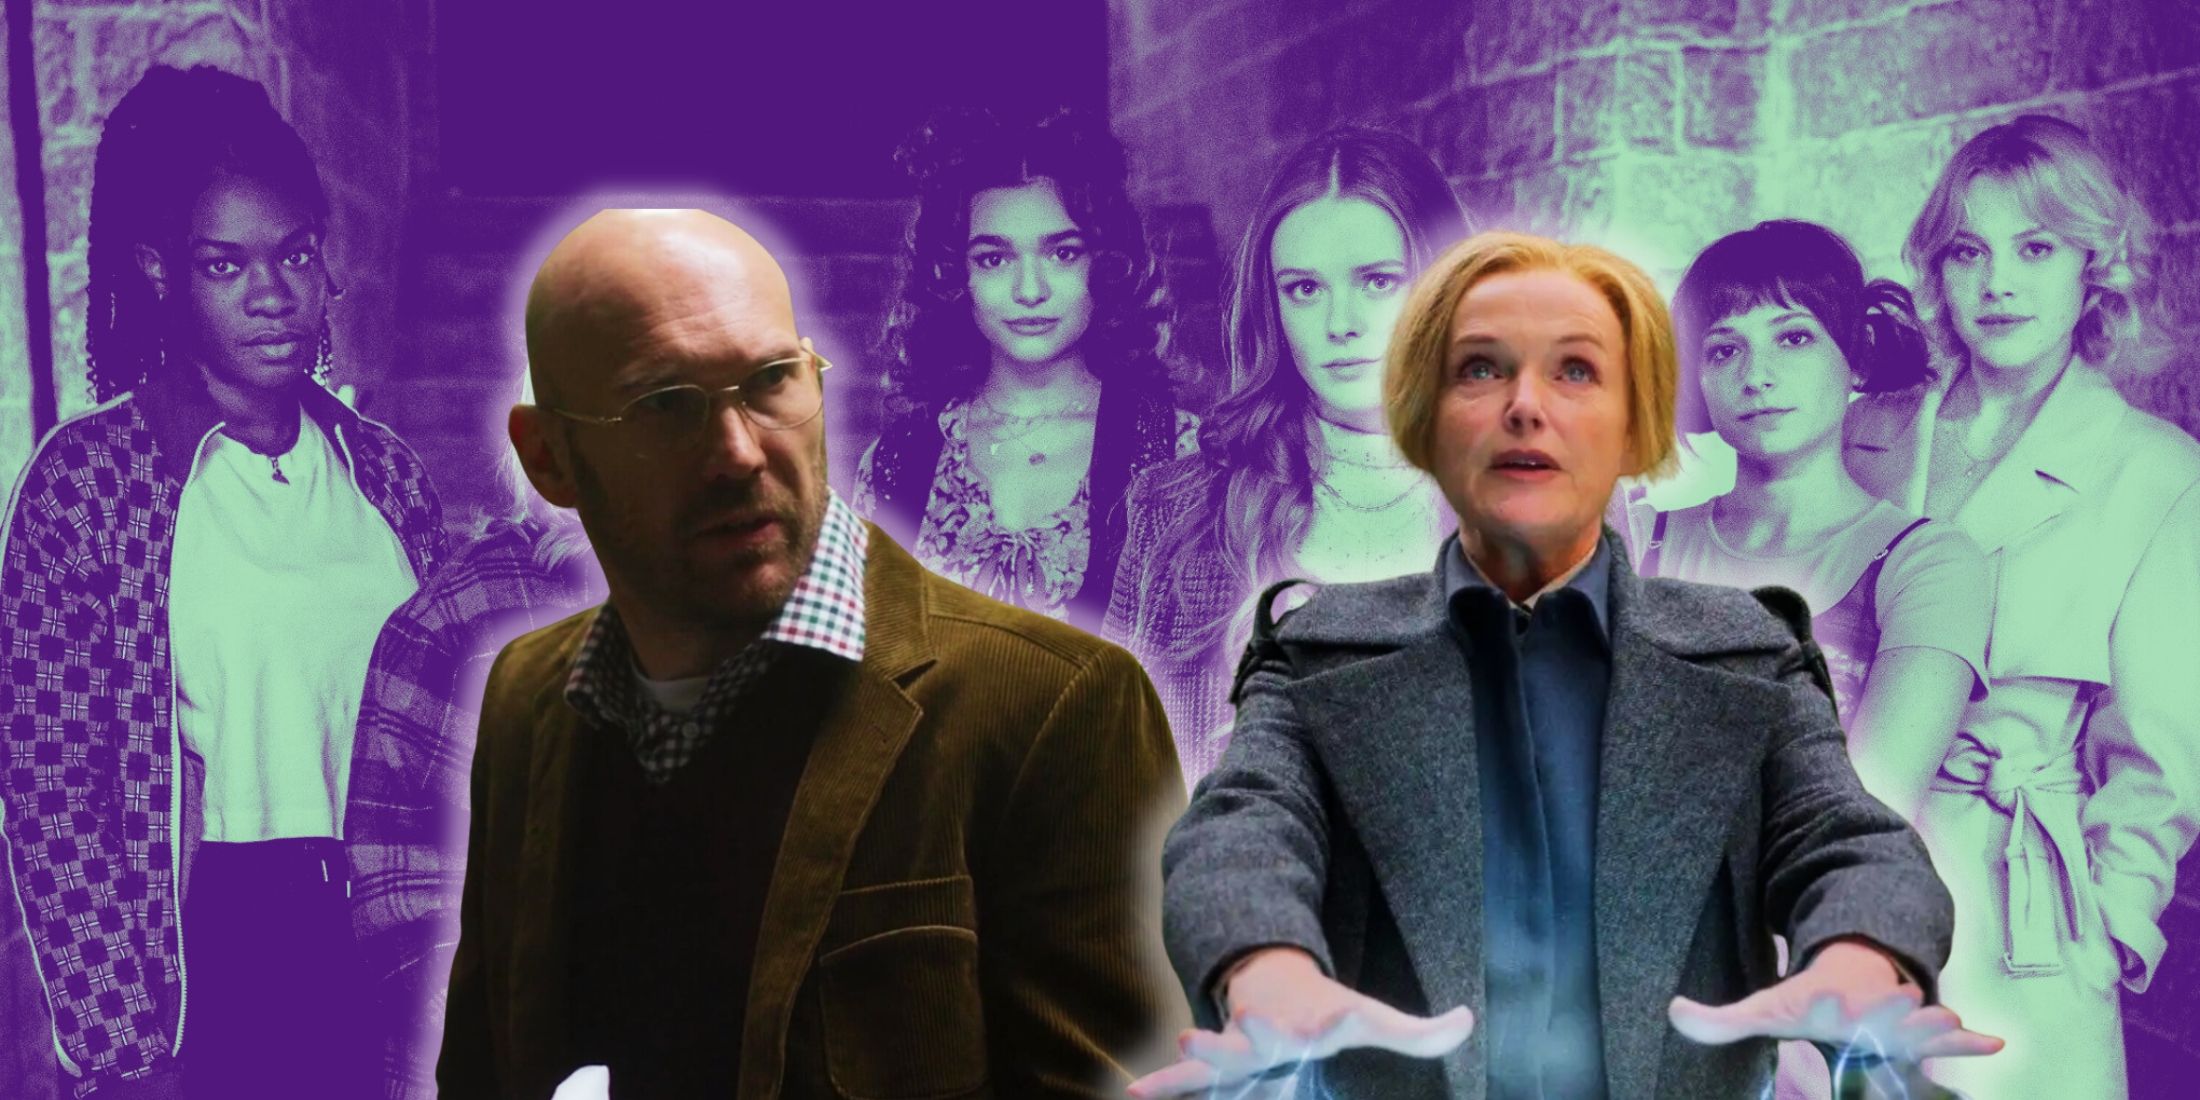 A custom image features Fate: The Winx Saga actors Alex Maqueen as Professor Harvey in season 1 and Miranda Richardson as Rosalind in season 2 over the main cast of characters tinted mint